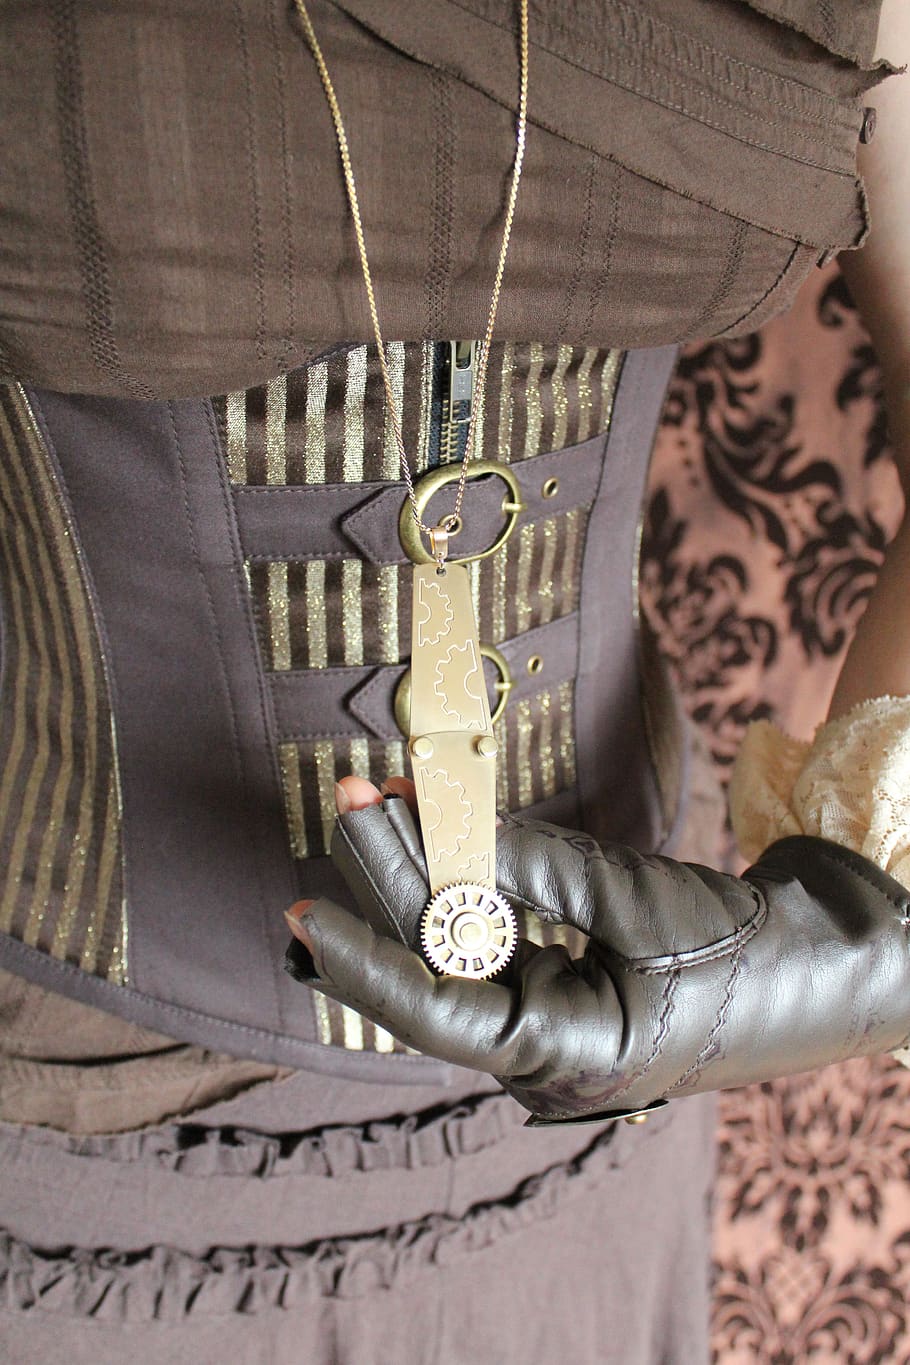 steampunk, jewellery, jewelry, corset, brown, fashion, model, glove, necklace, cog